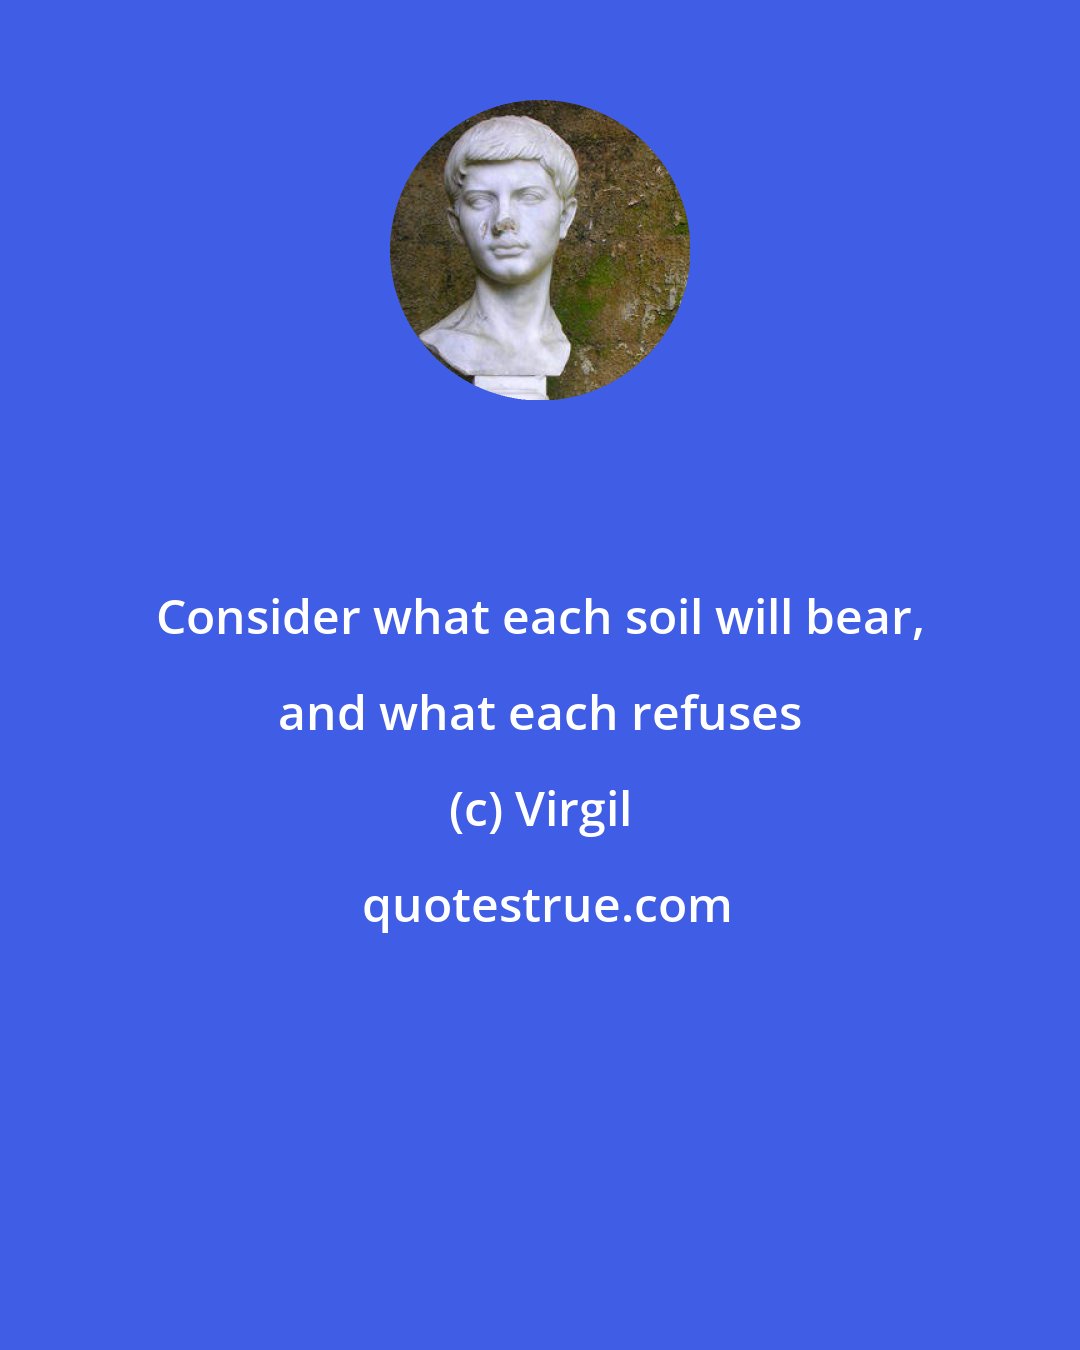 Virgil: Consider what each soil will bear, and what each refuses